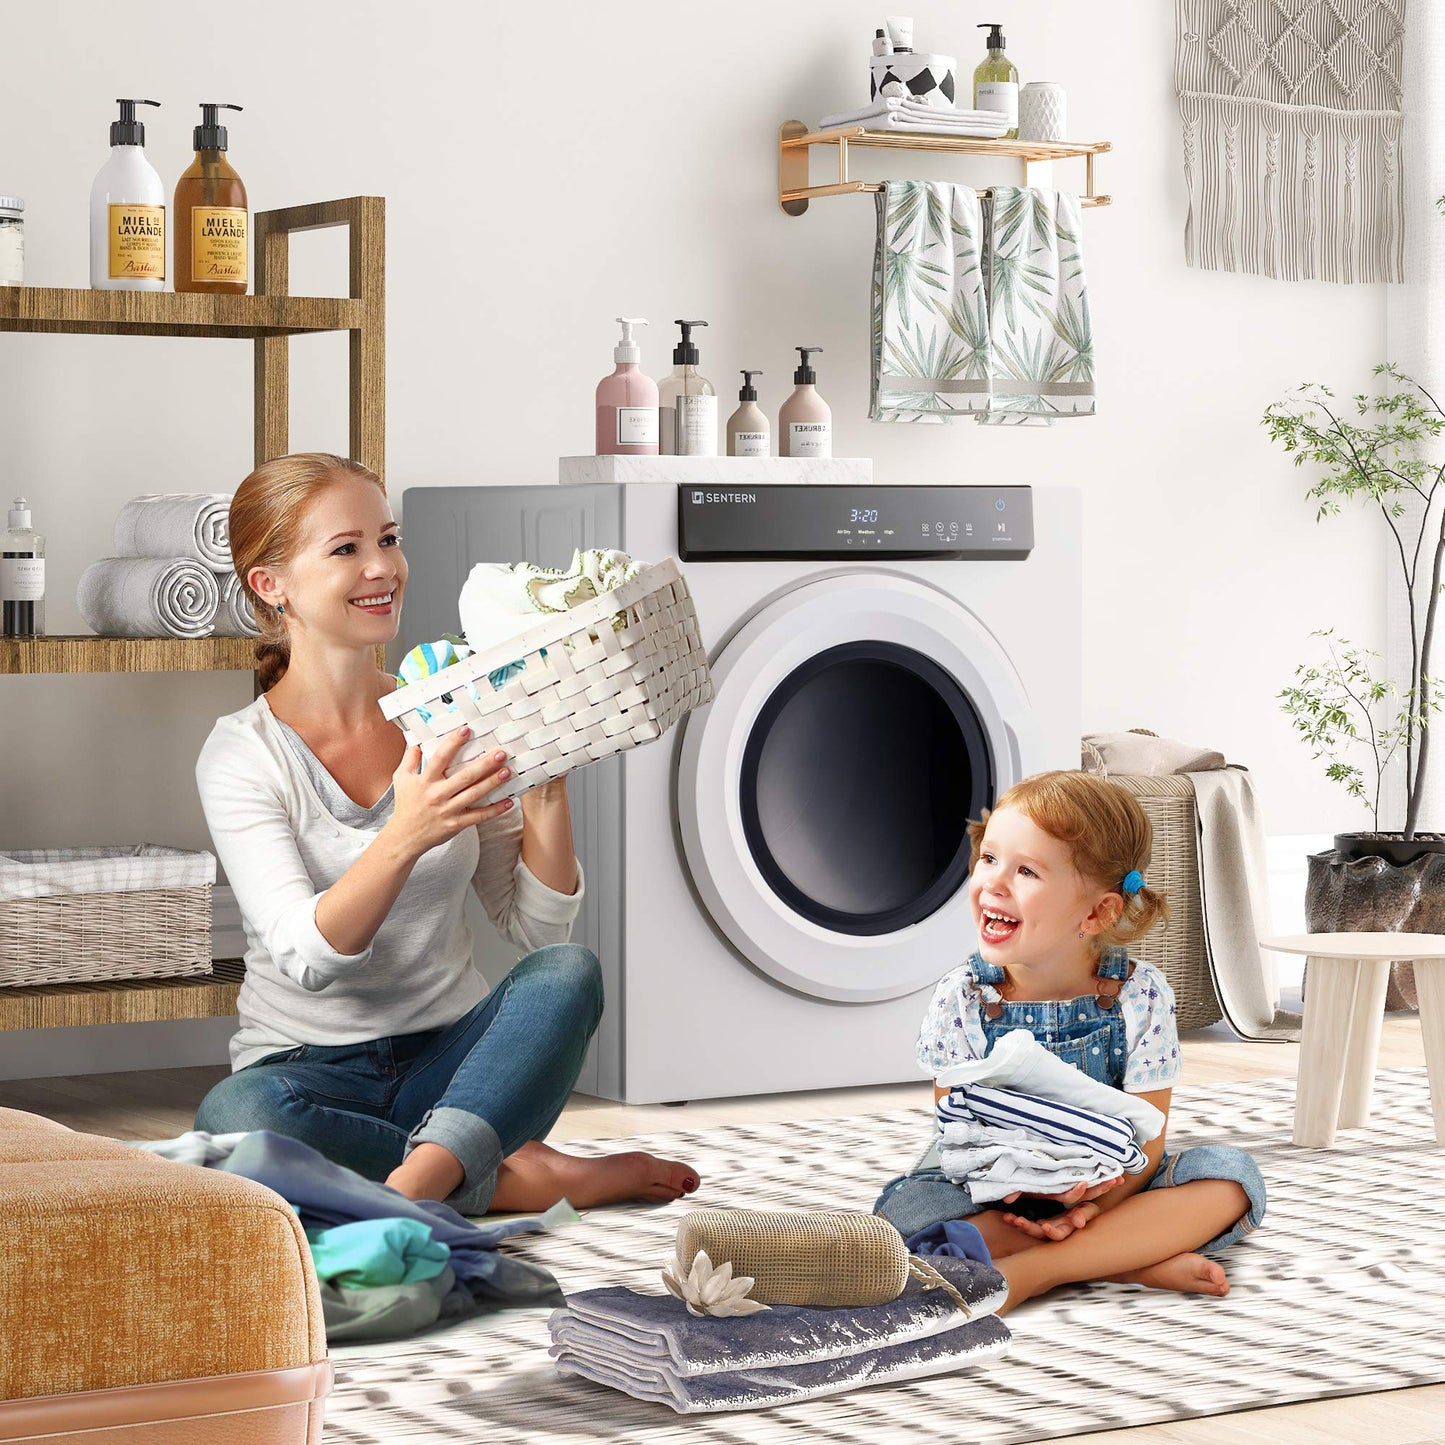 Sentern Electric Portable Clothes Dryer, Front Load Compact Tumble Laundry Dryer with Touch Screen Panel